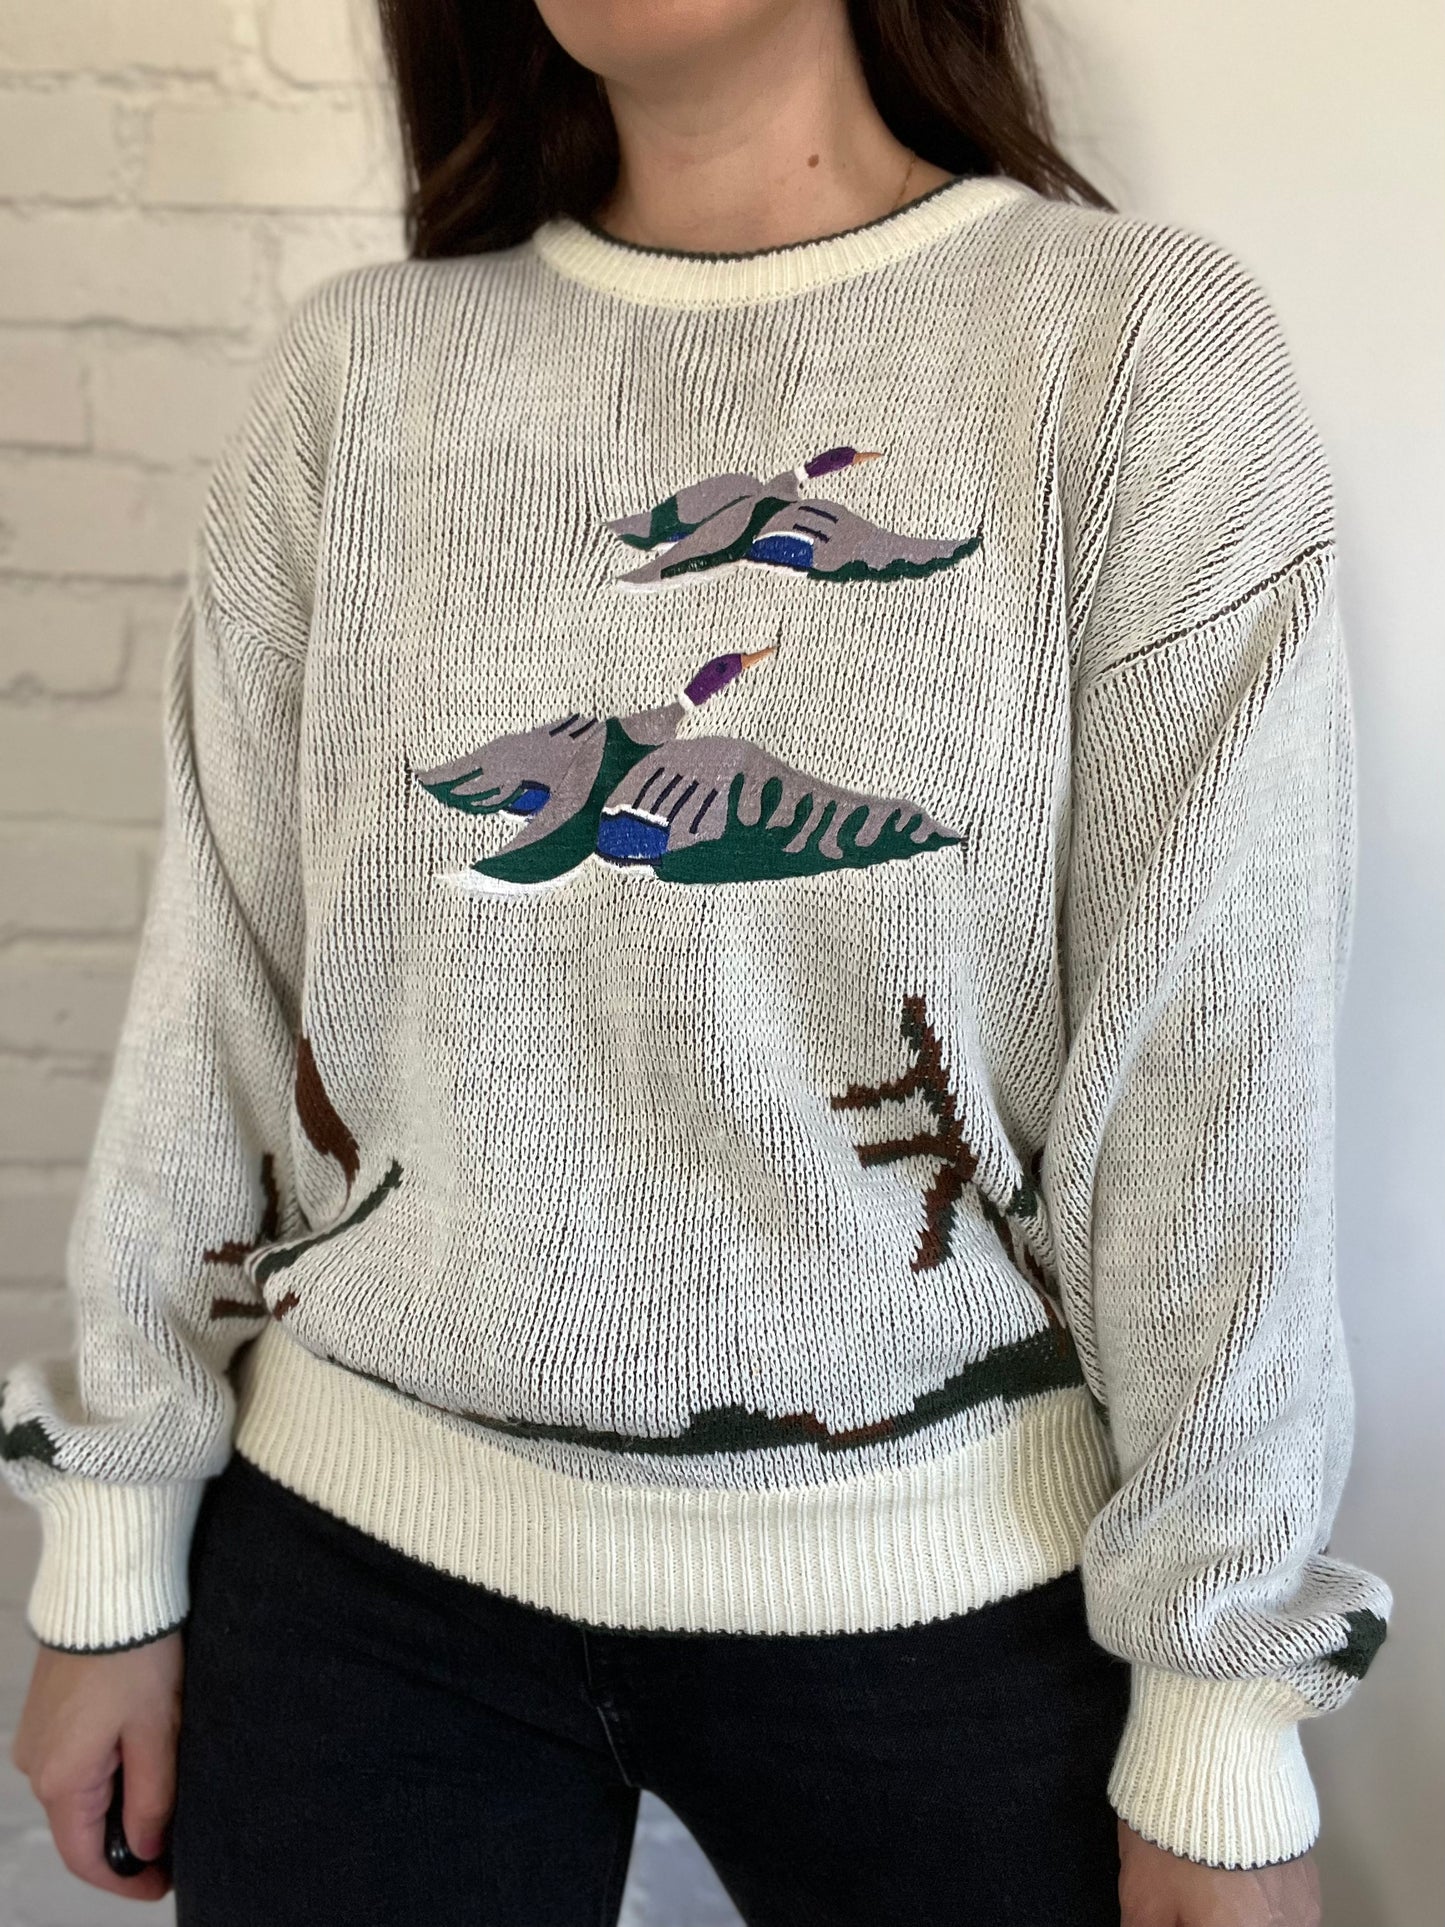 Flying Duck Knit Sweater - Size L/XL